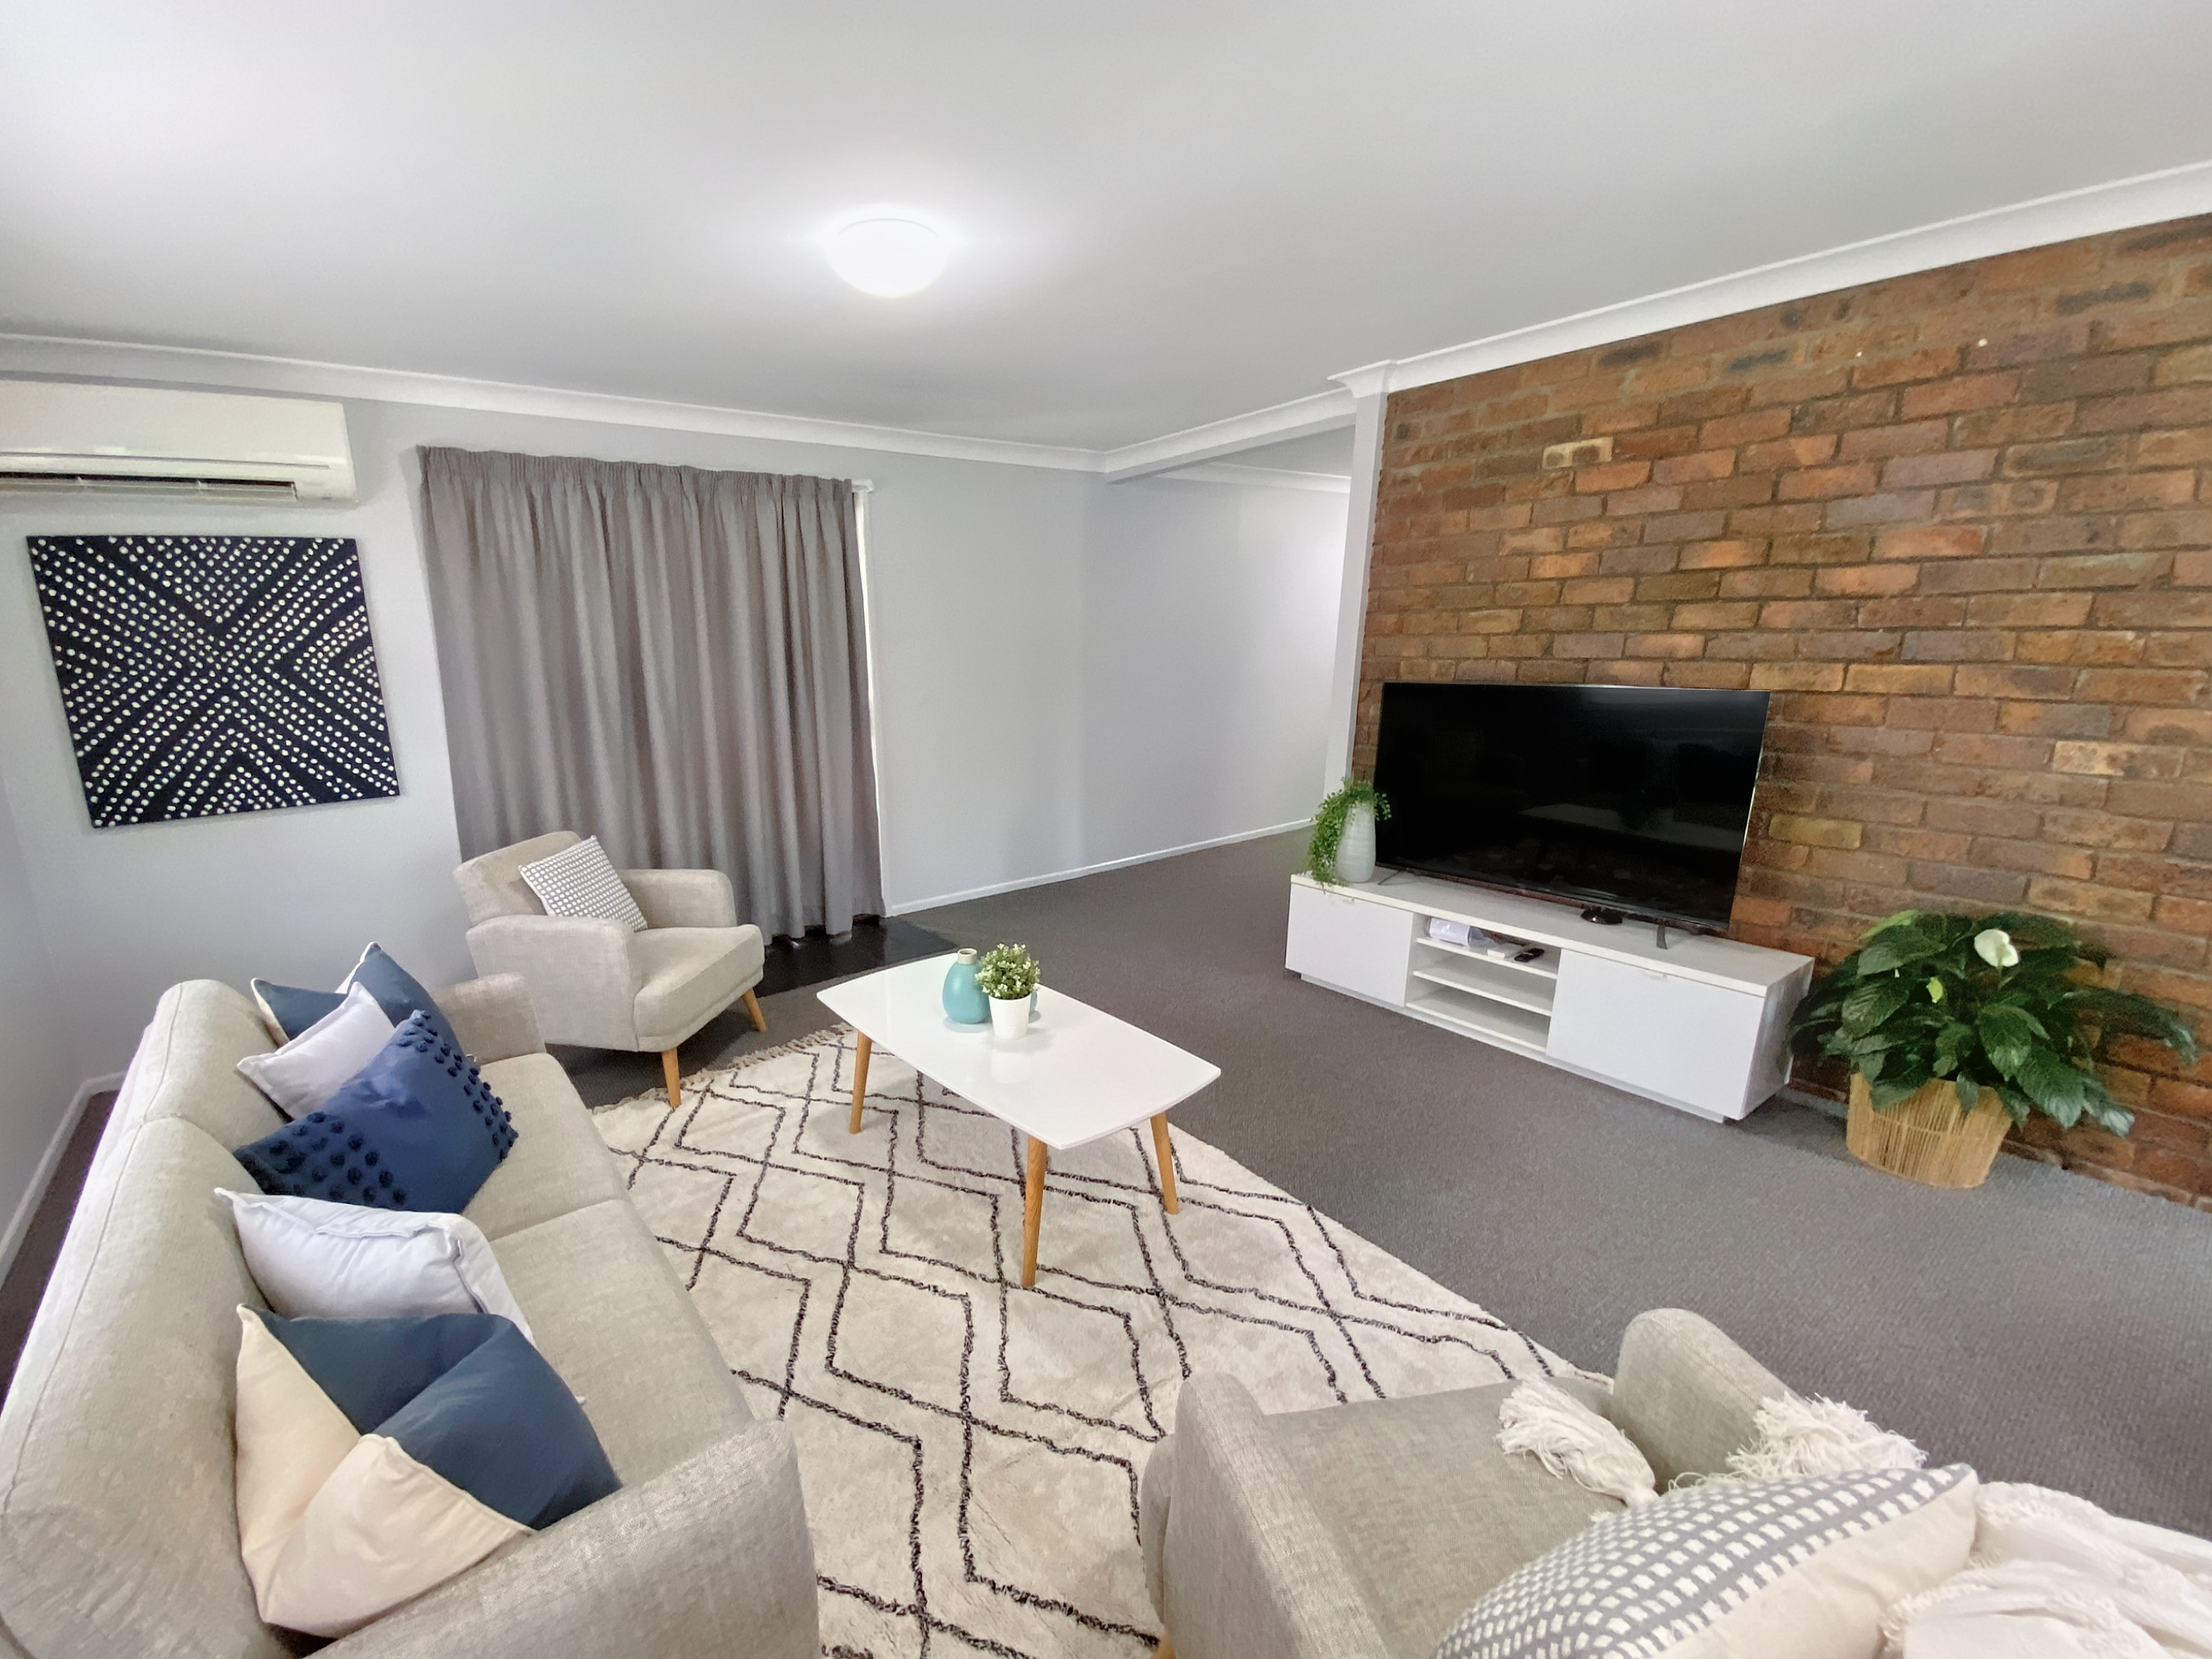 wide angle photo of loungeroom furnished with sofas, rug, coffee table, and large television